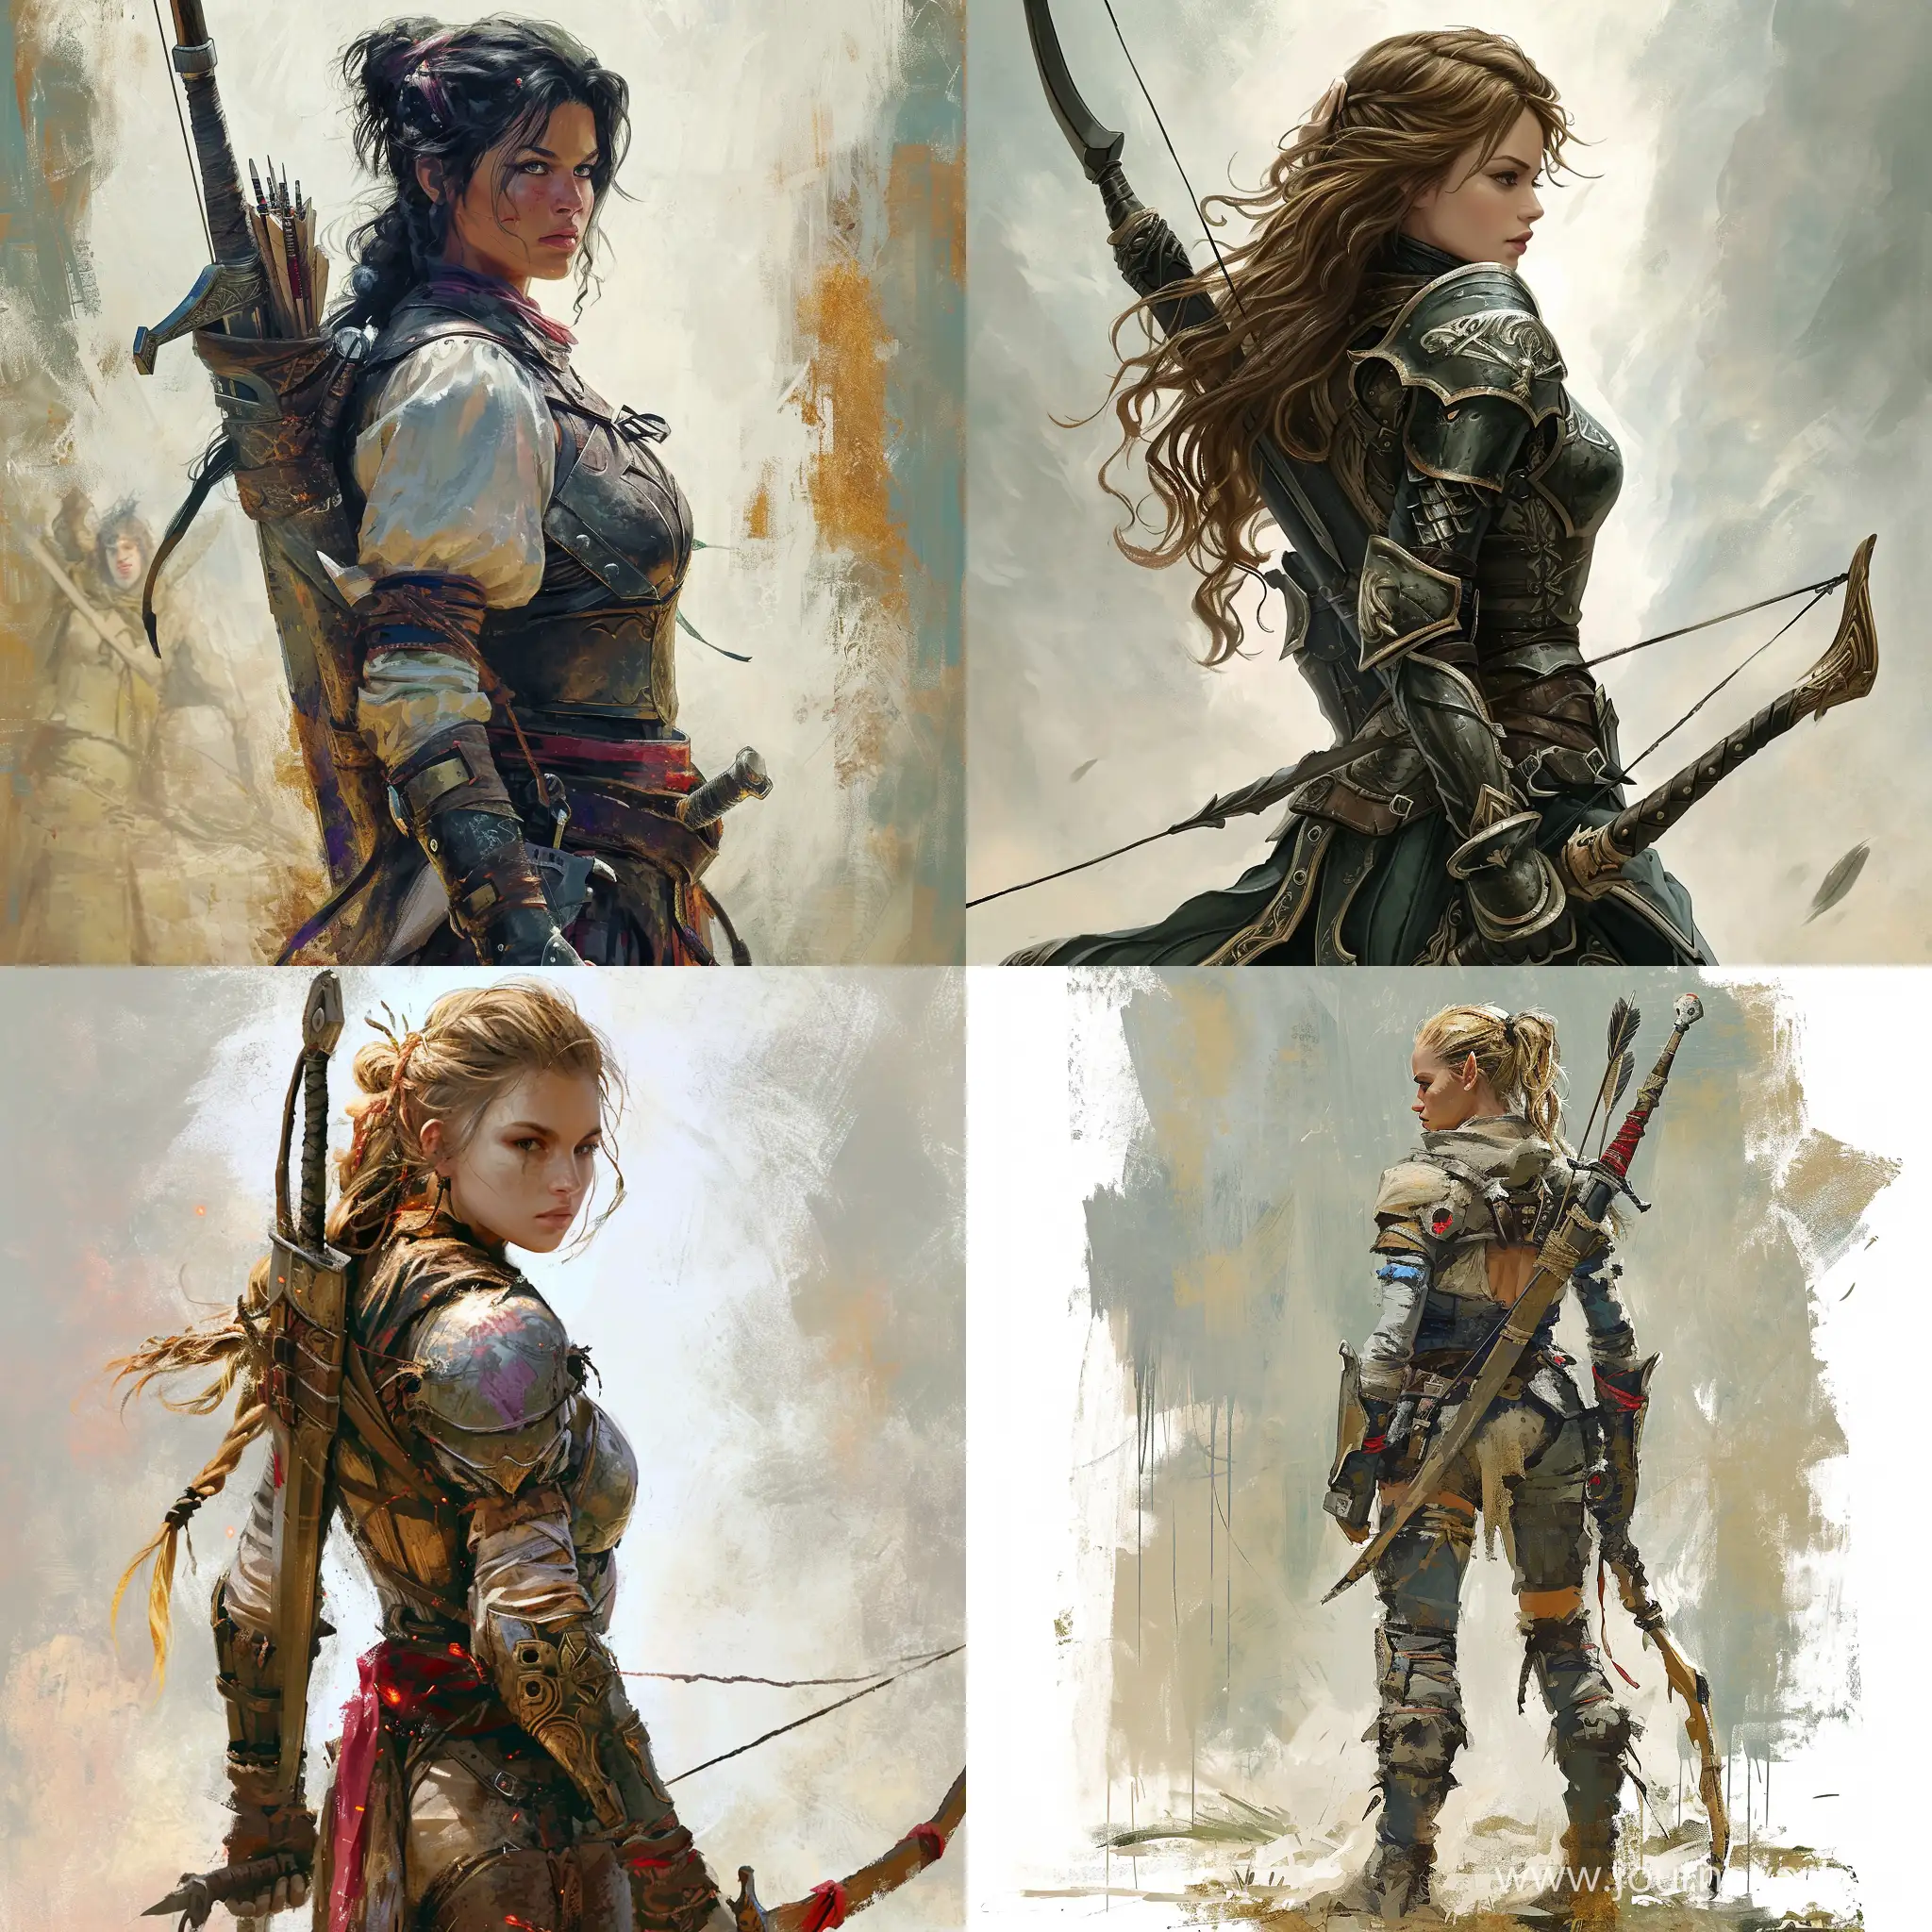 Courageous-Girl-Paladin-with-Sword-and-Bow